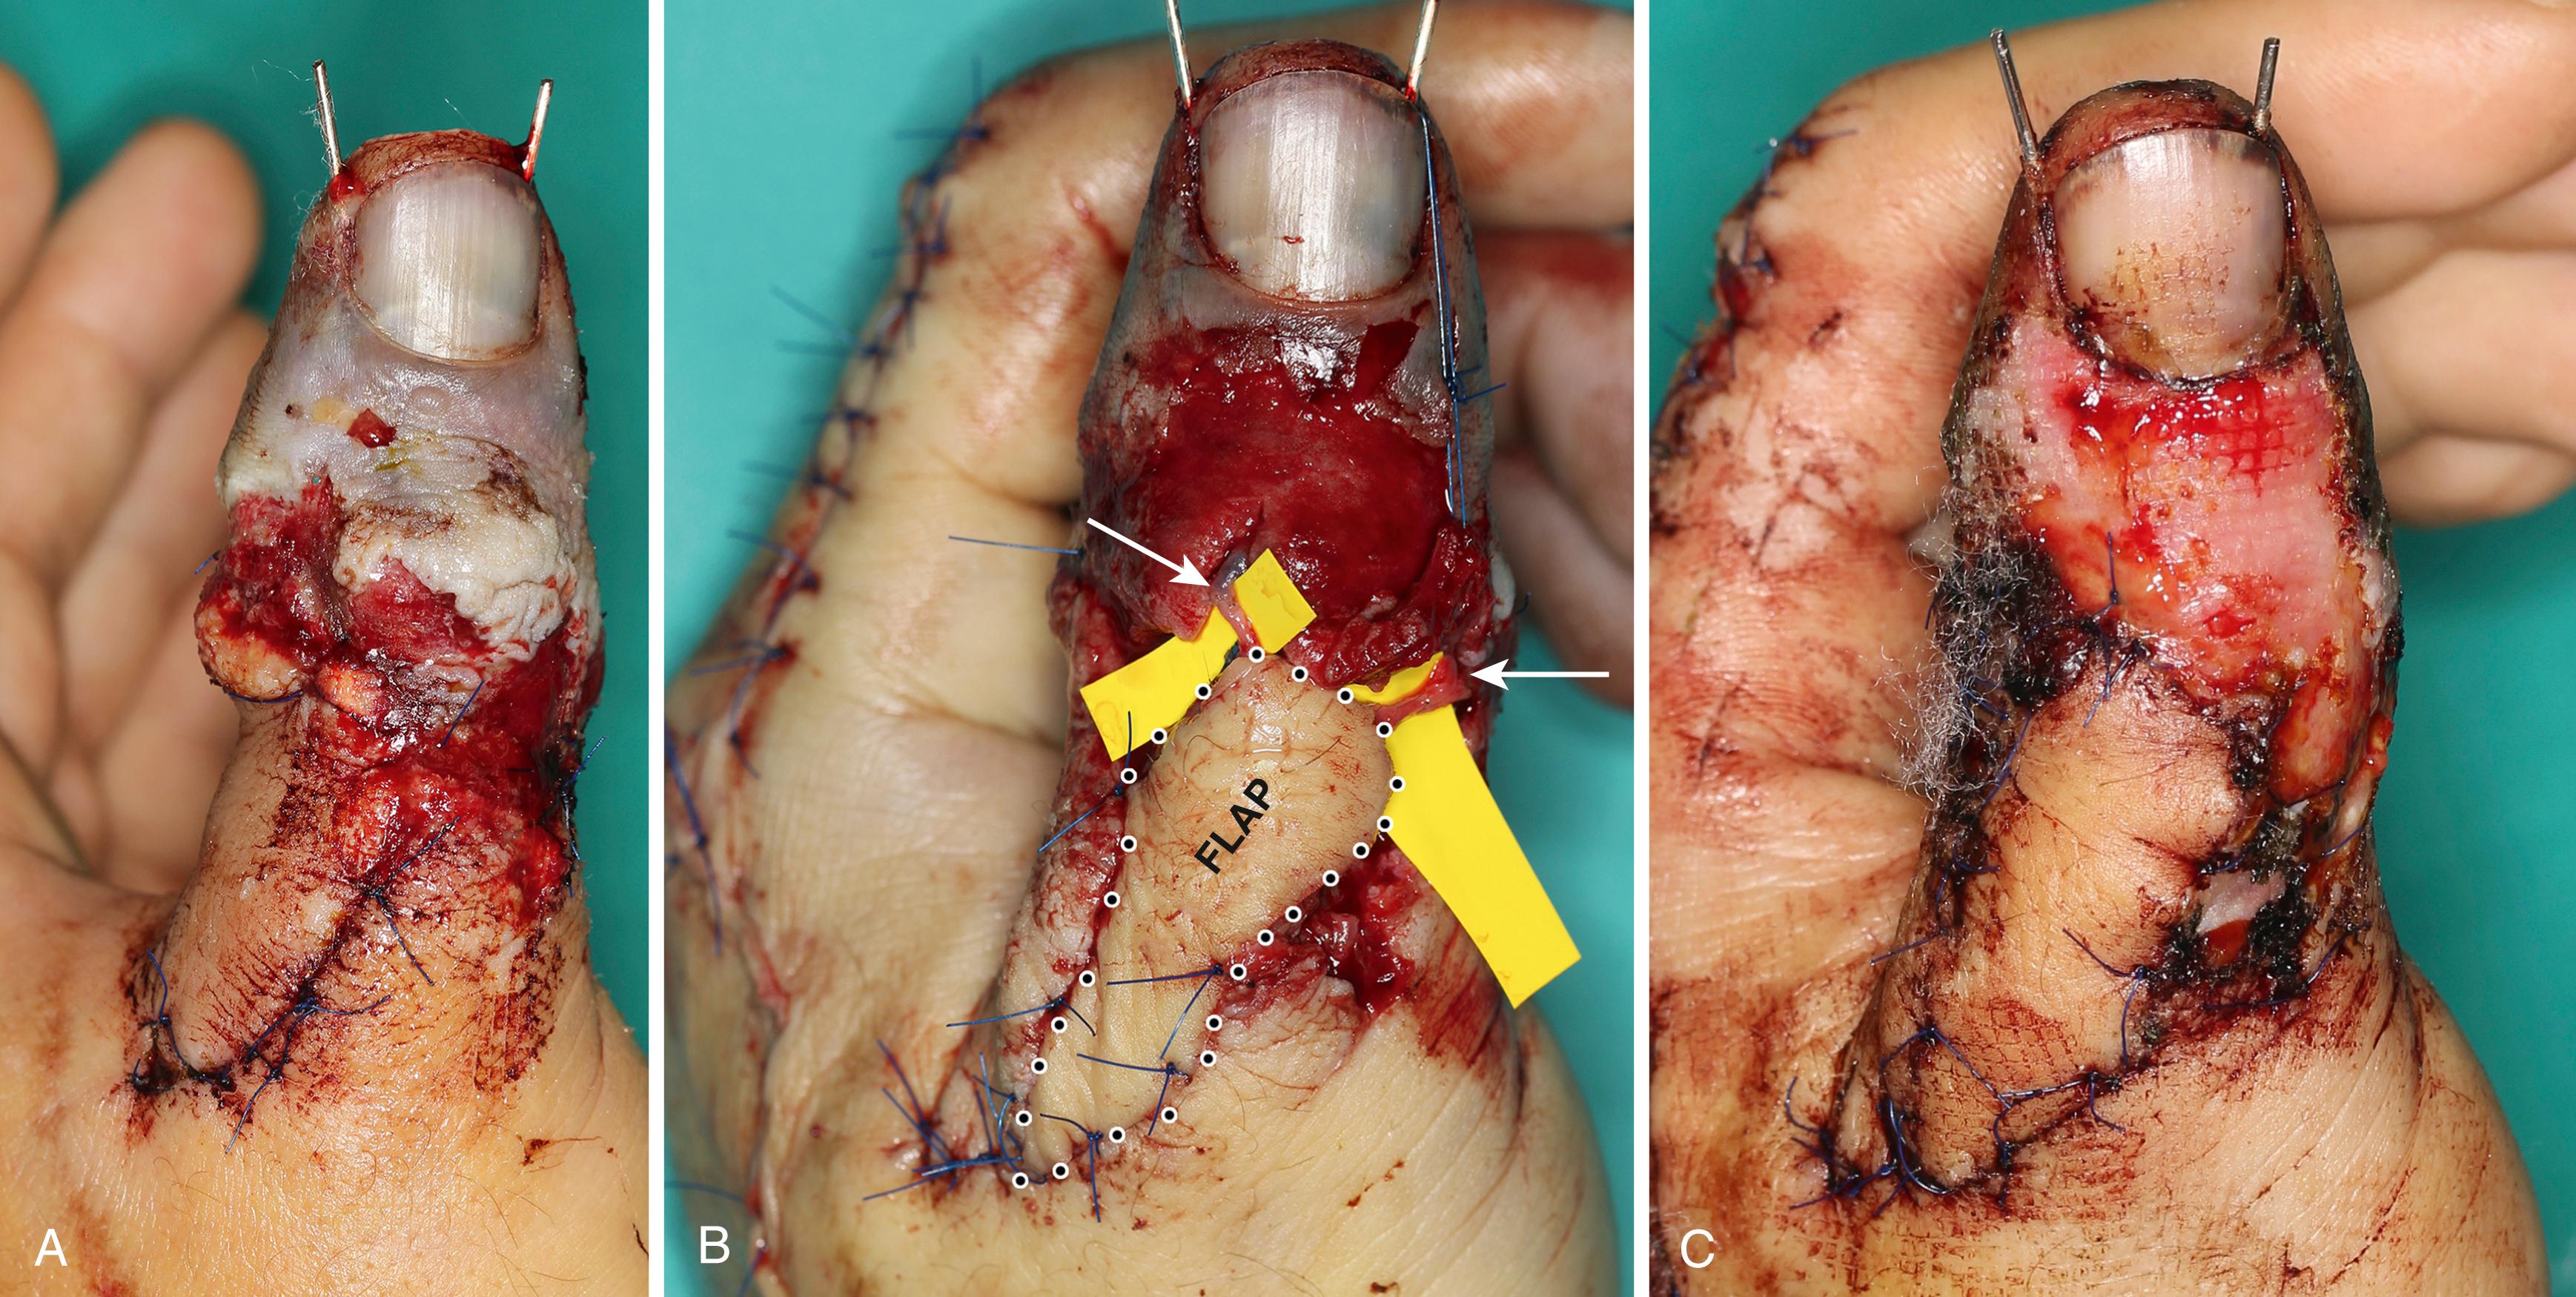 Fig. 48.8, A, This patient was referred 48 hours after replantation for impending venous failure. B, A 1.0 × 2.5 cm first dorsal metacarpal flap was elevated from the dorsum of the index, permitting primary closure of the donor site. The flap eased the circular soft tissue constriction of the thumb, and most importantly carried two veins restoring outflow of the thumb (blue arrows) . C, Complete survival at 2 weeks.